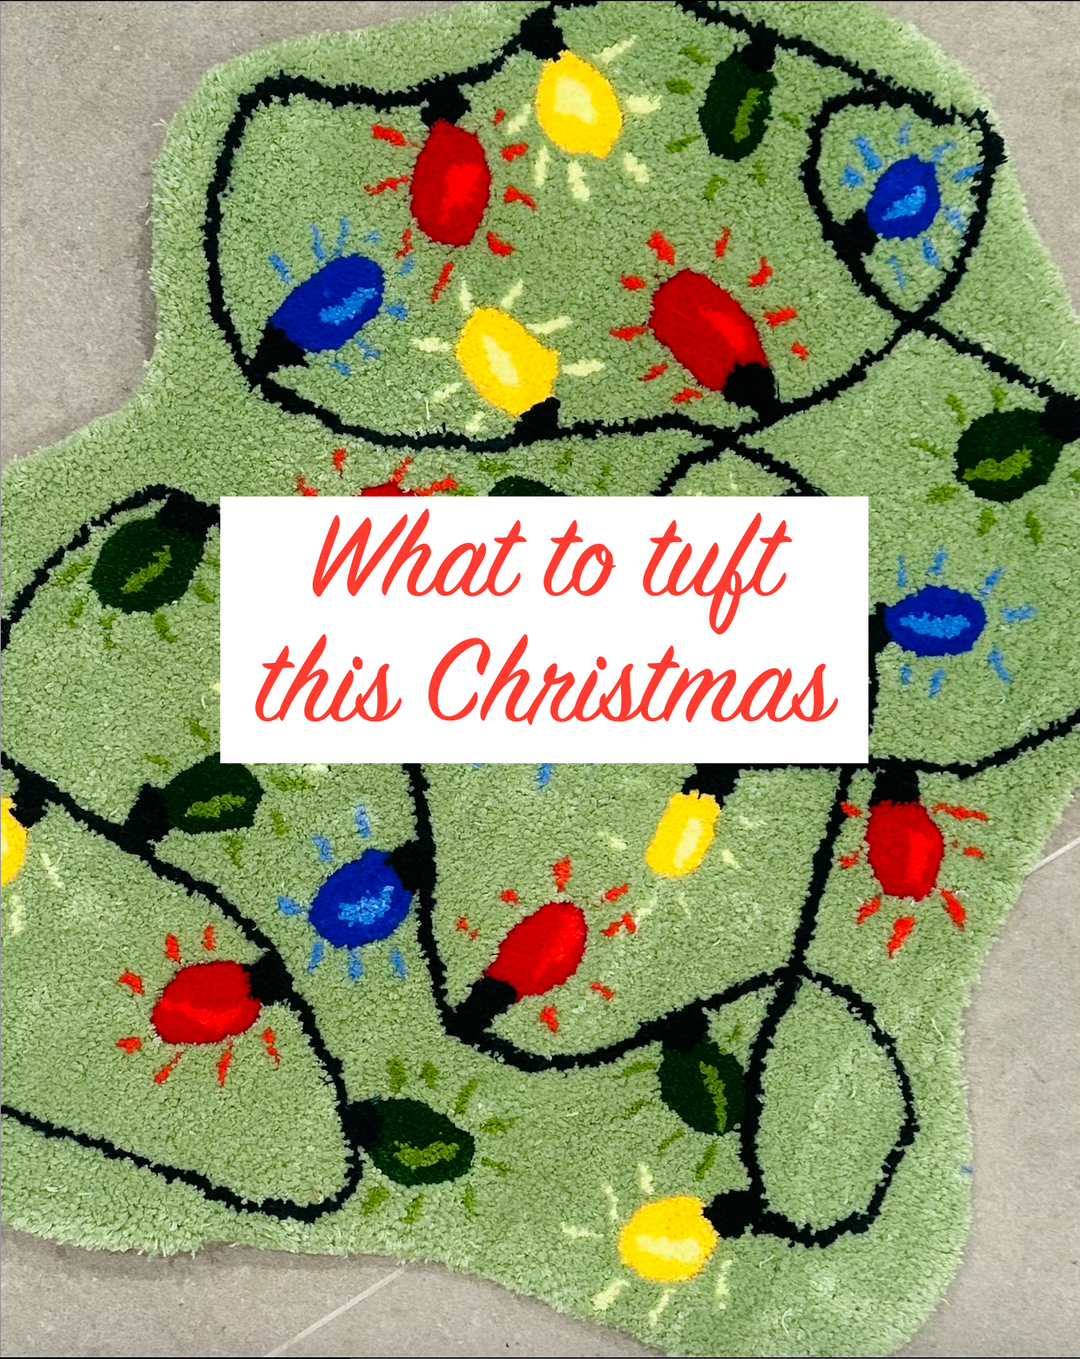 Making a rug this Christmas? Here's our top 10 tufting ideas